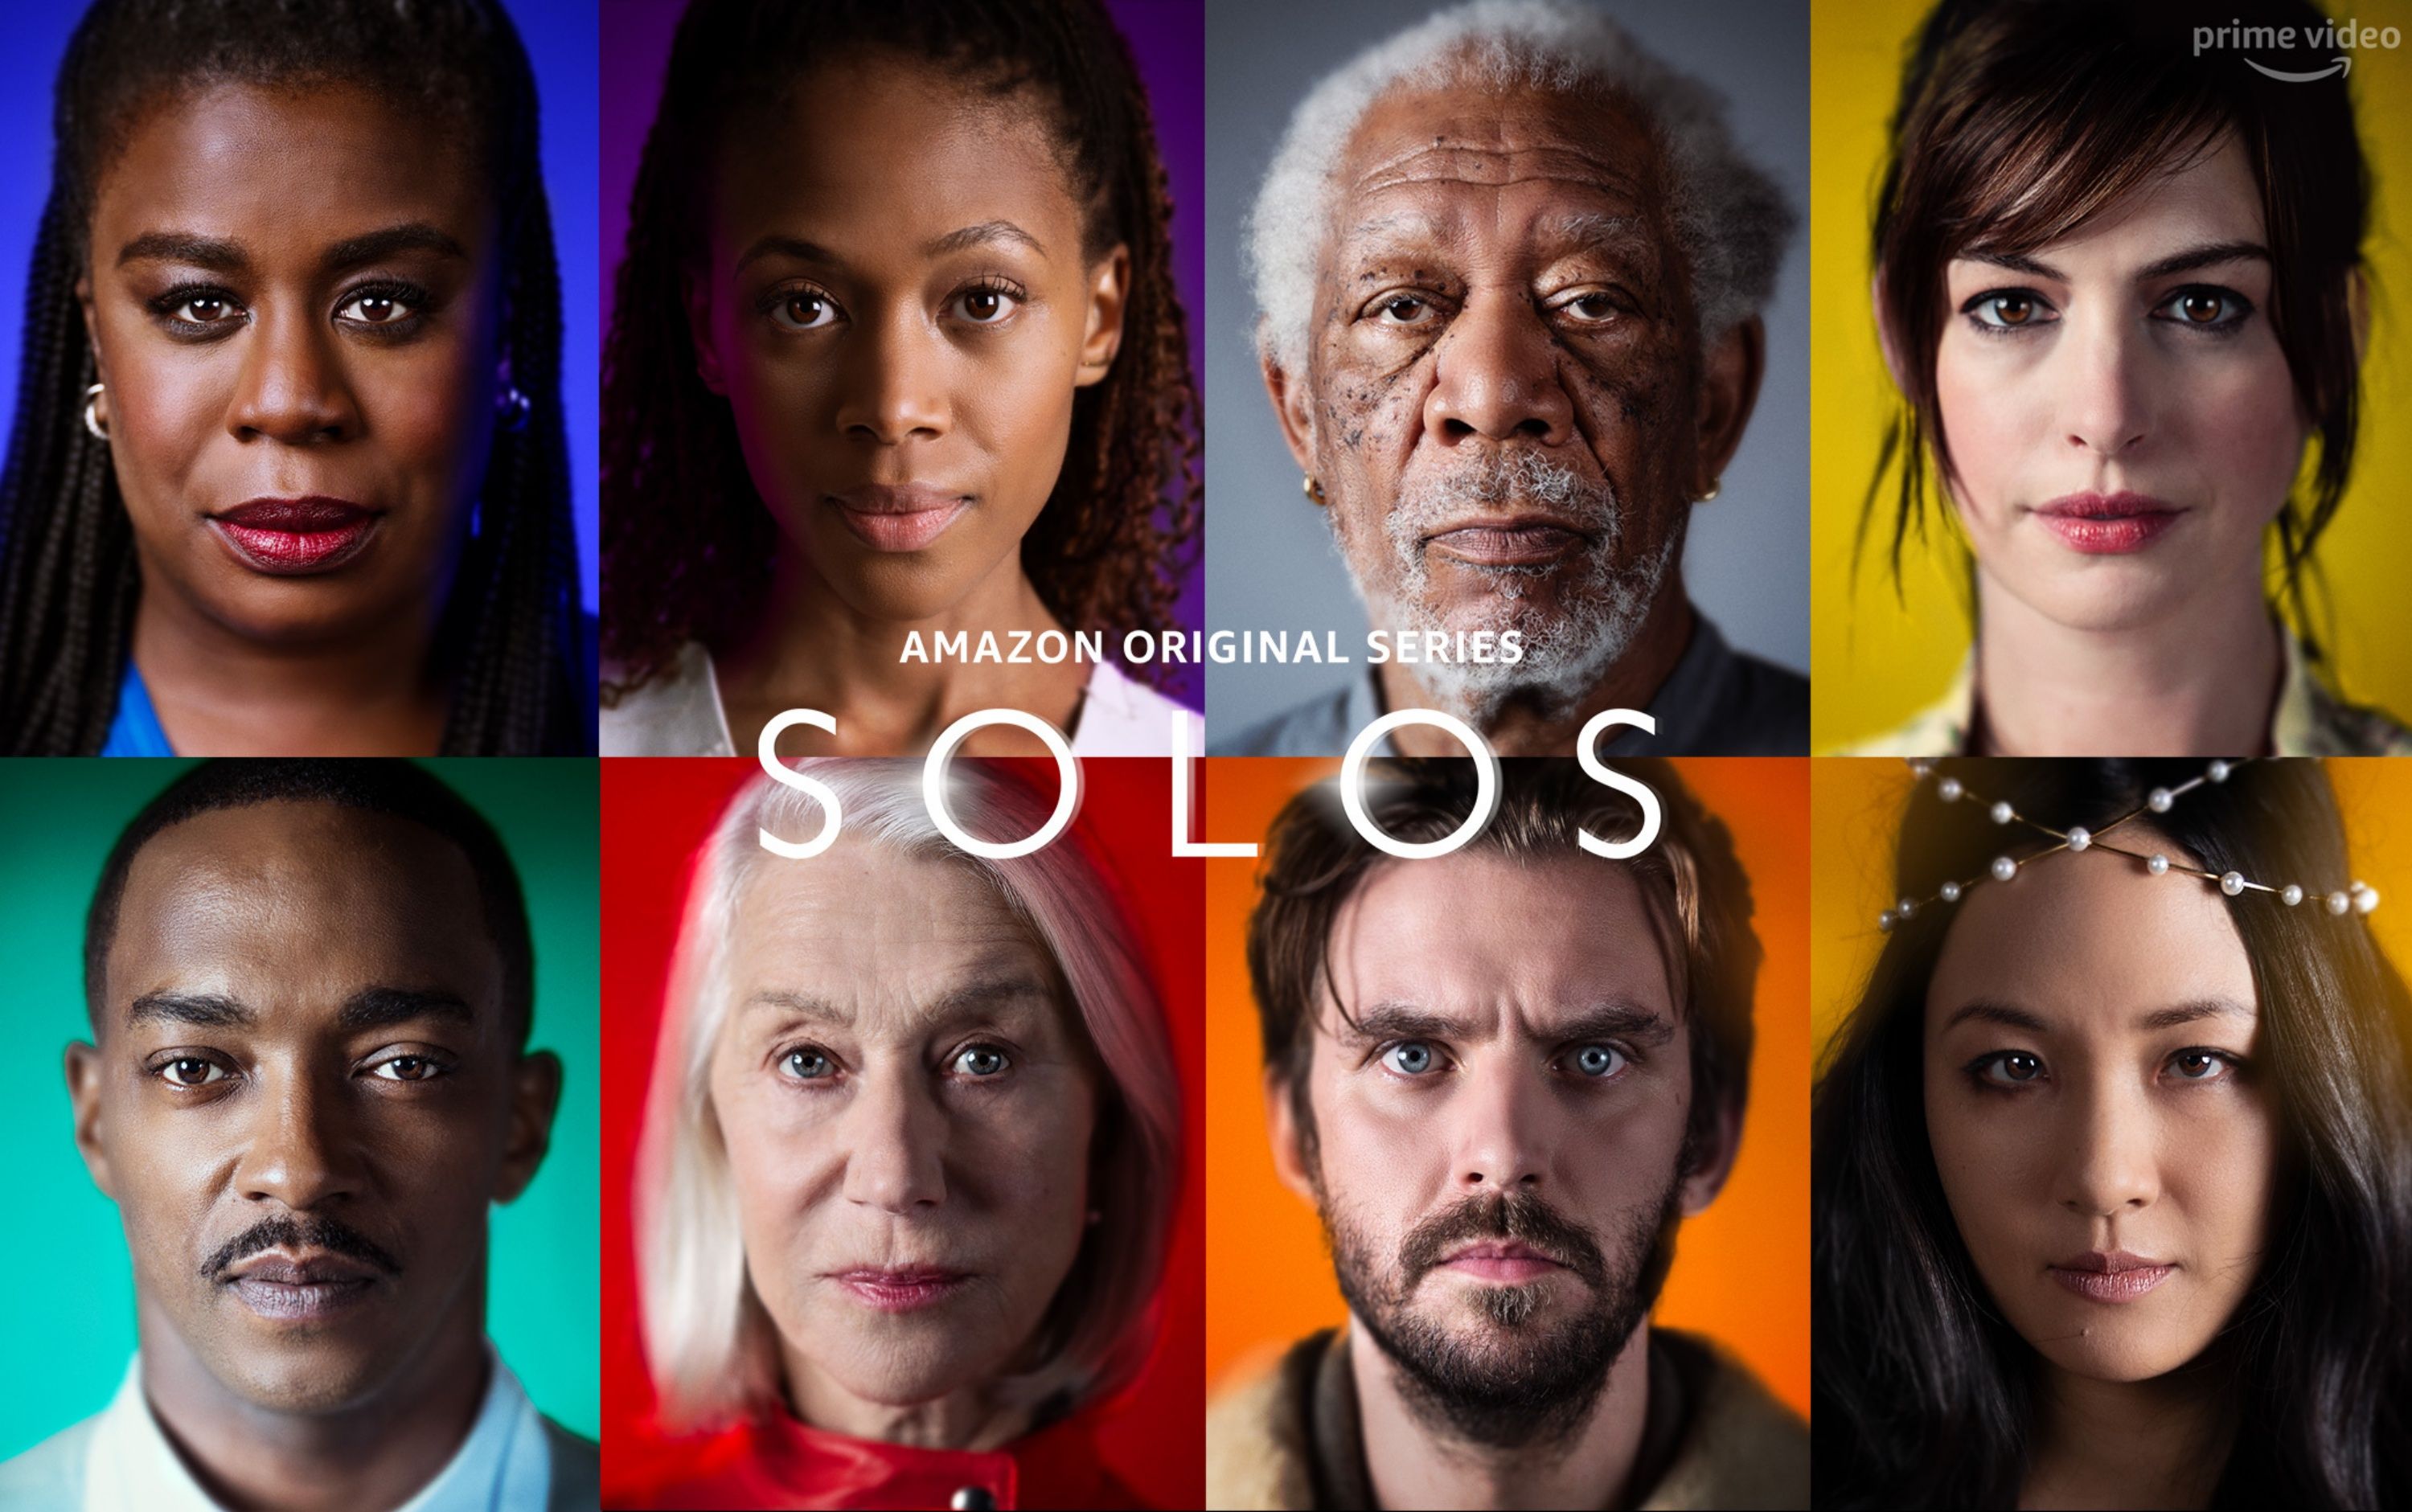 solos-poster-03